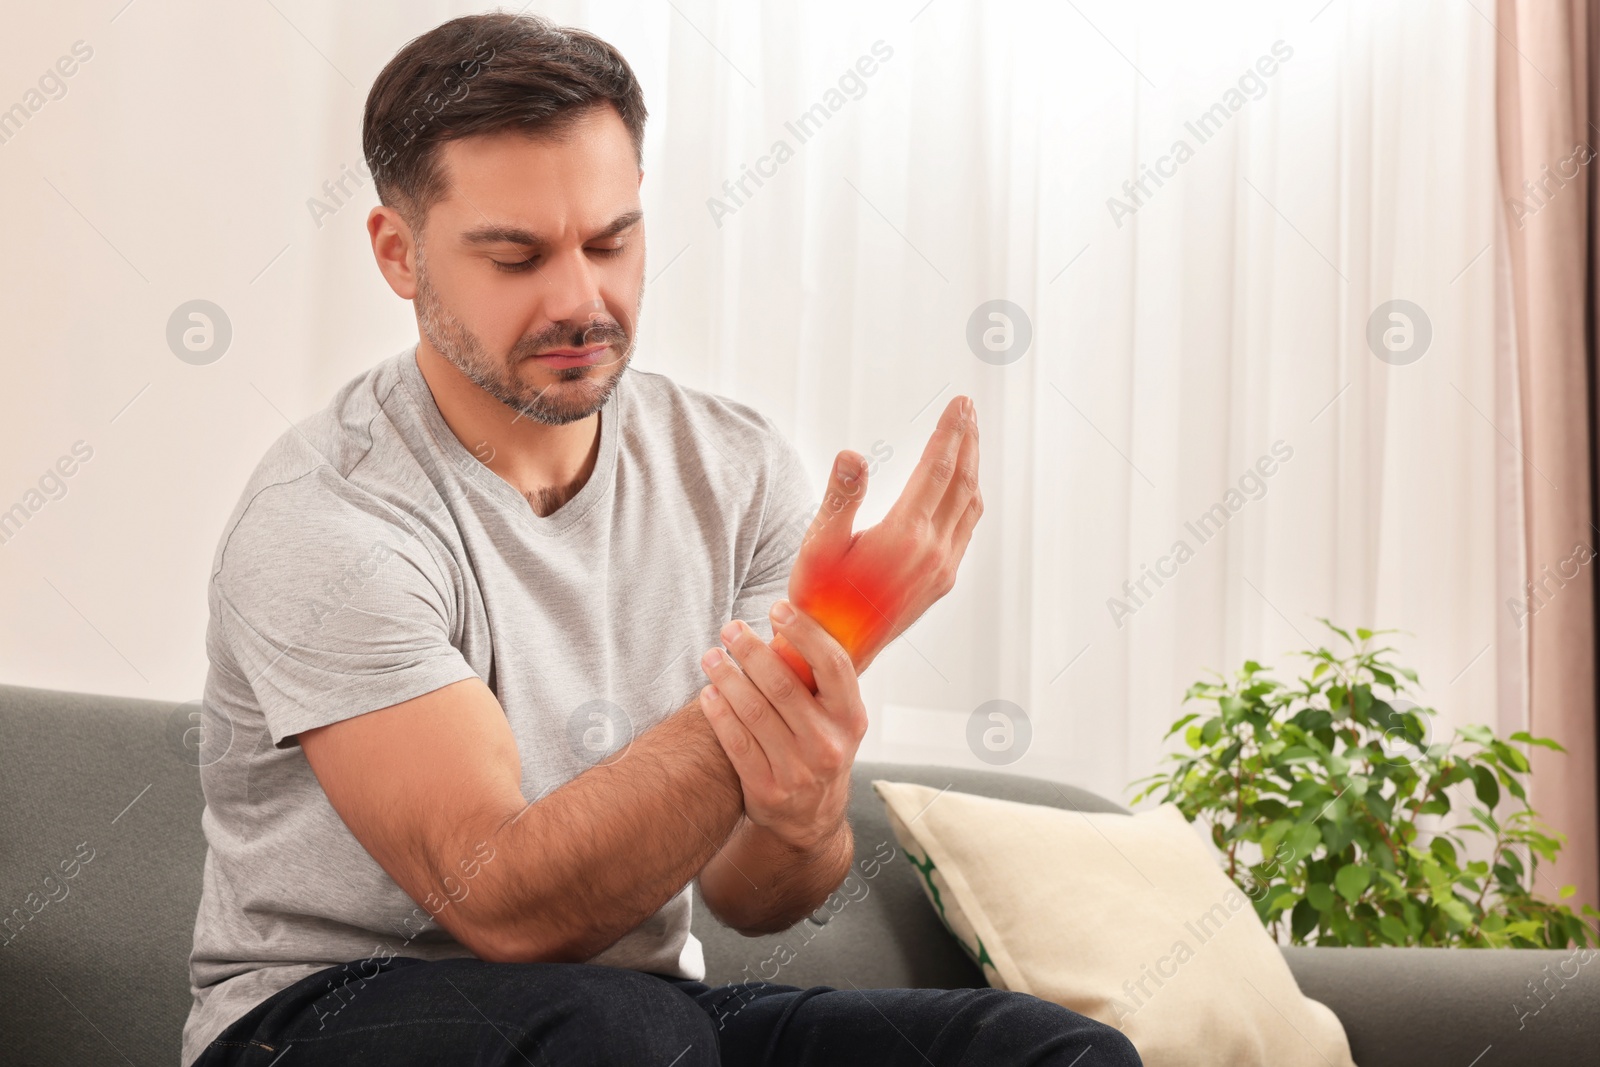 Image of Arthritis symptoms. Man suffering from pain in his hand on sofa at home